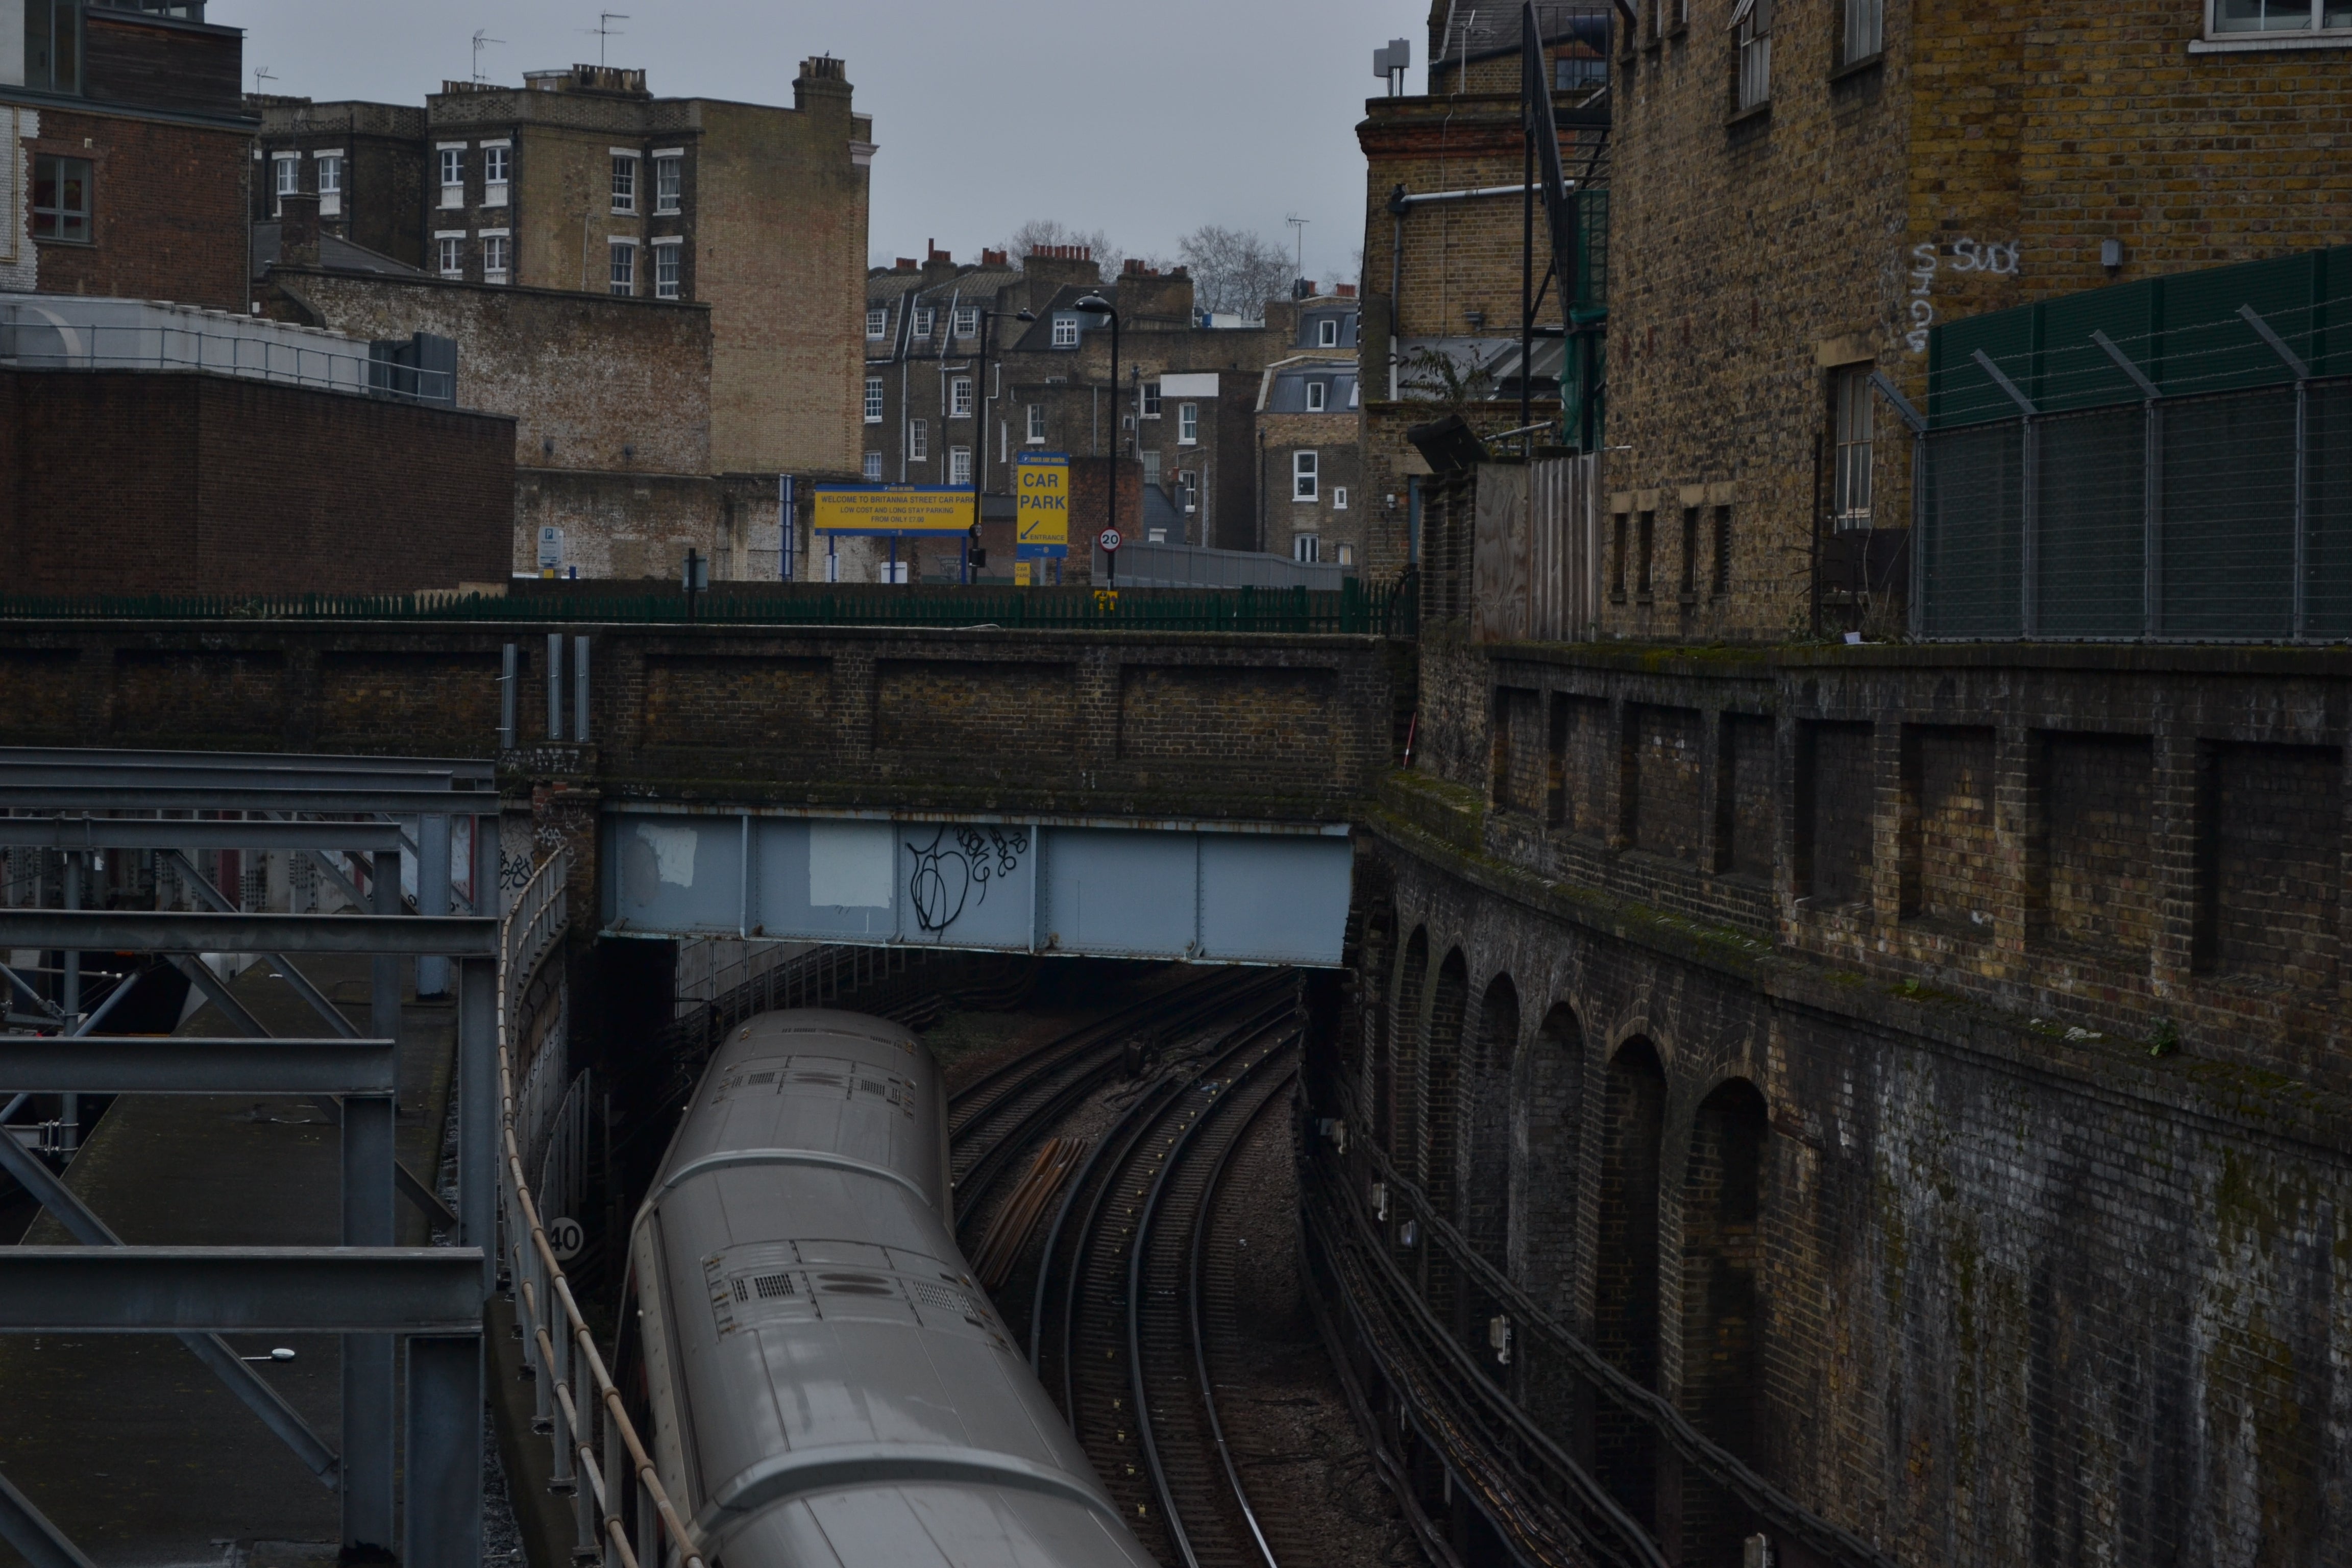 The Victorians cut a wide trench through this area in the 1800s for the Metropolitan line, the first underground railway in the world